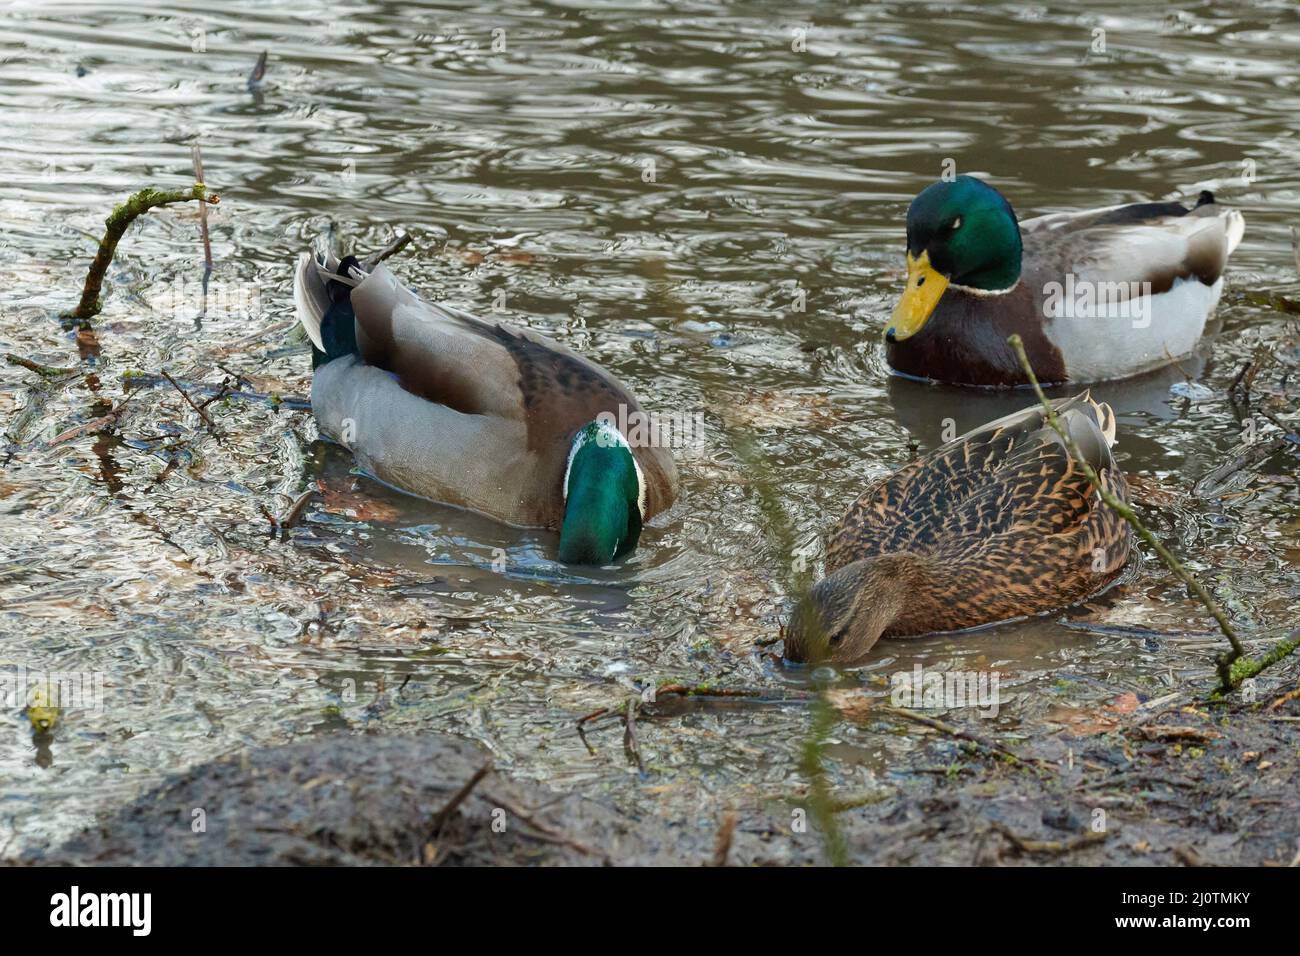 Three ducks in the water of a small river Stock Photo